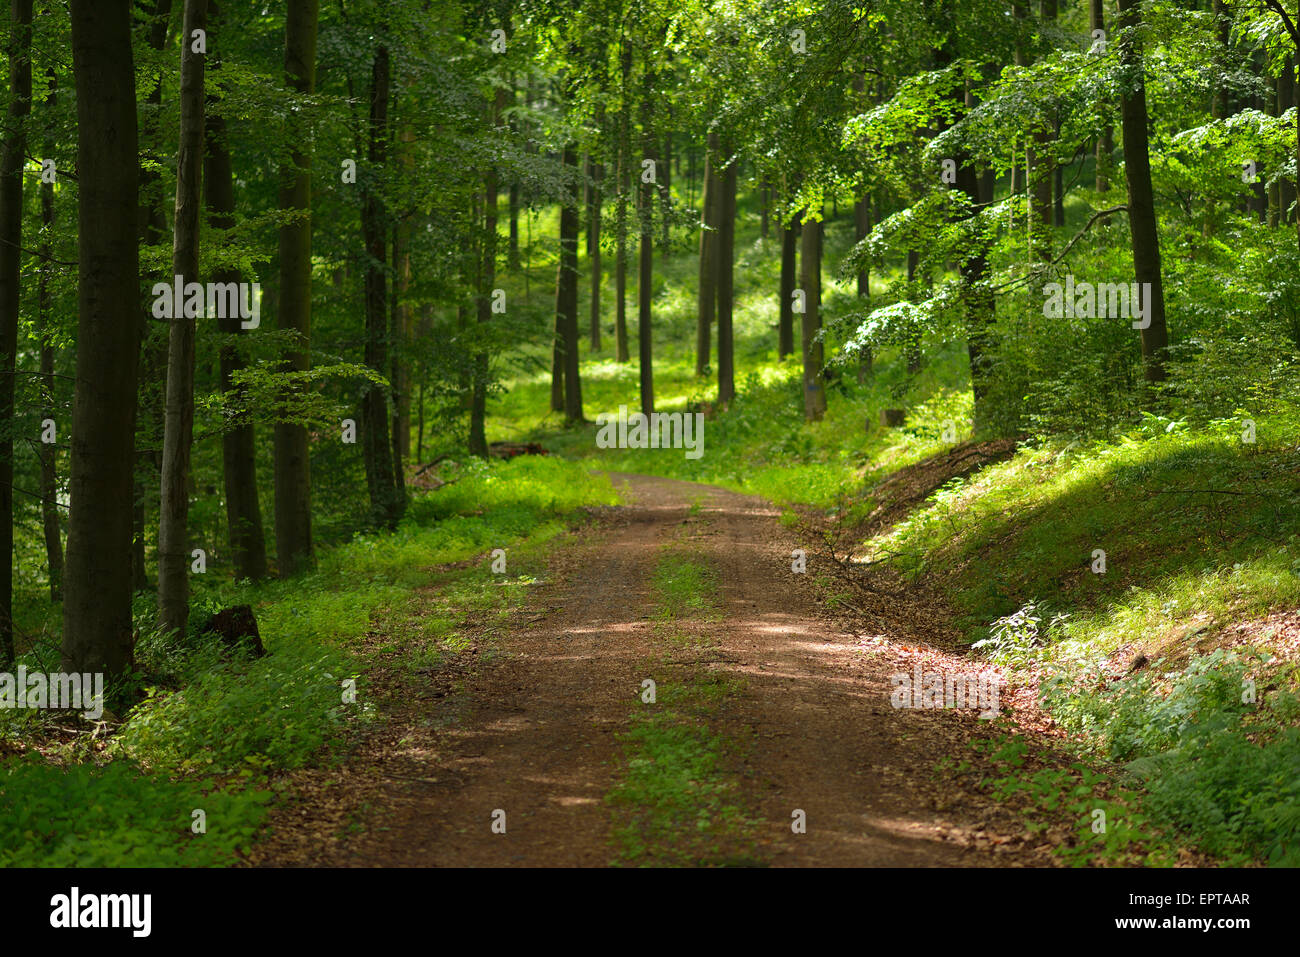 Dirt Road in Forest in Summer, Hoher Meissner, Werra-Meissner District, Hesse, Germany Stock Photo